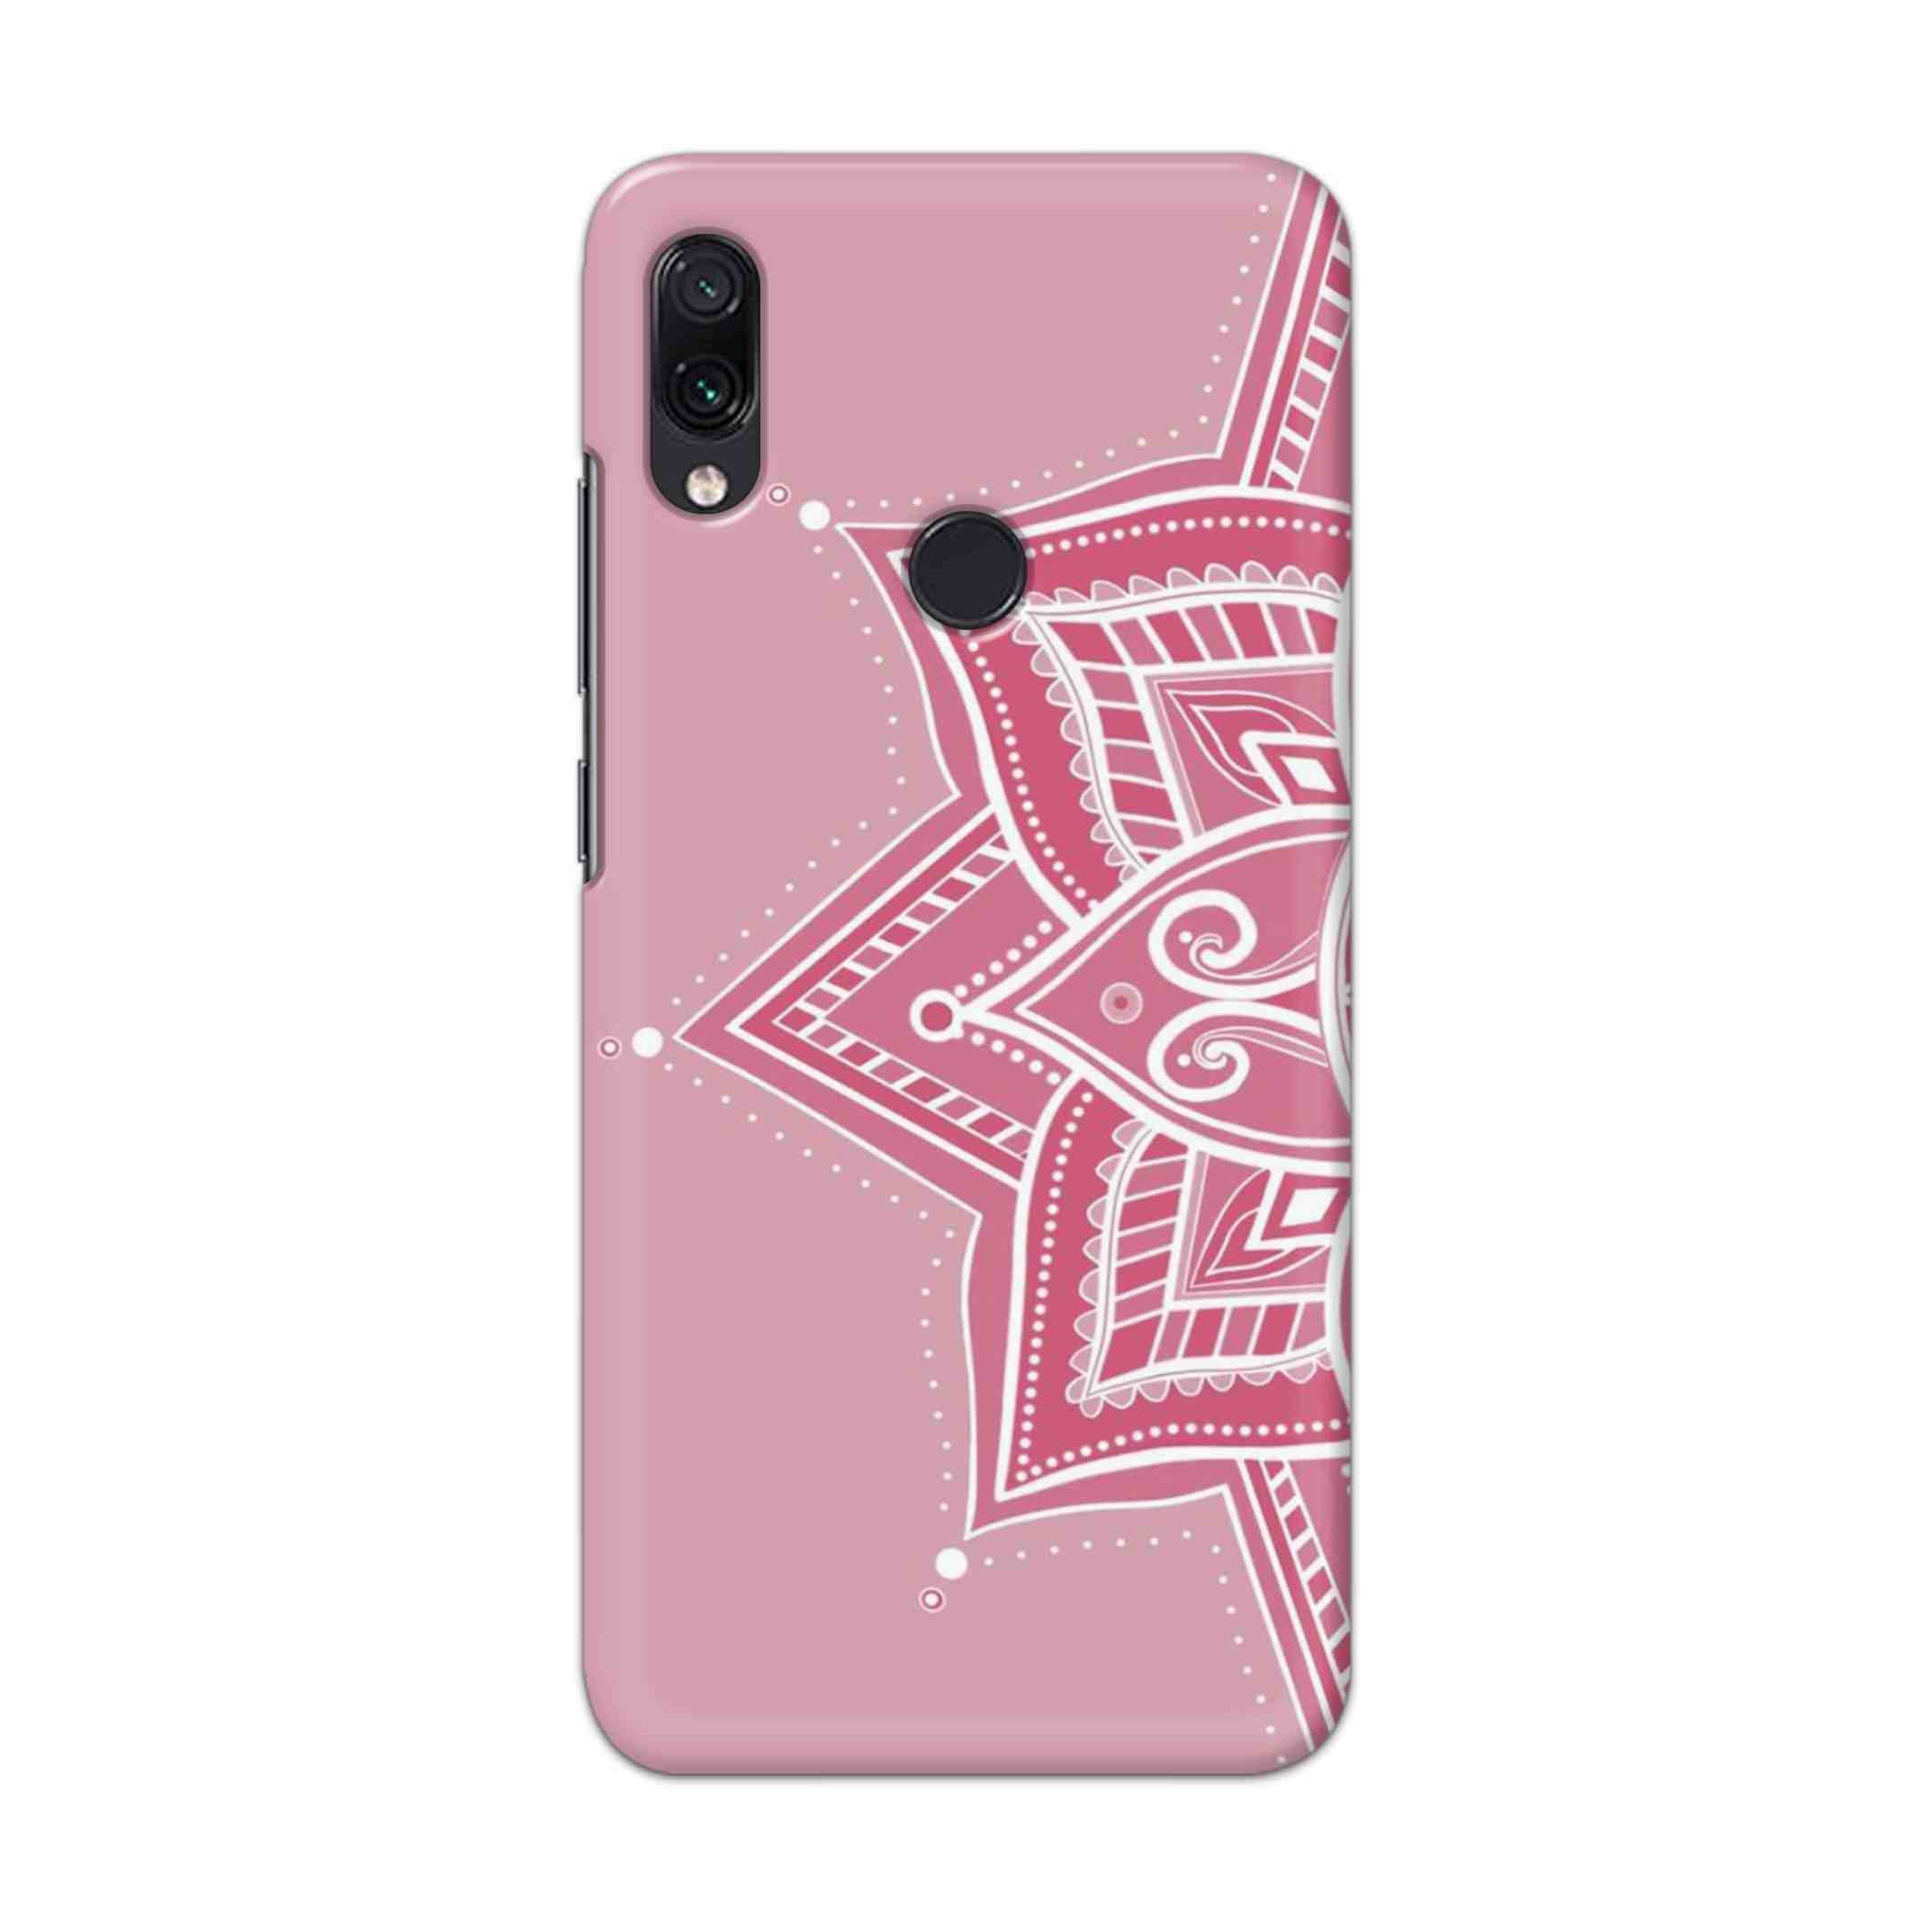 Buy Pink Rangoli Hard Back Mobile Phone Case Cover For Xiaomi Redmi 7 Online